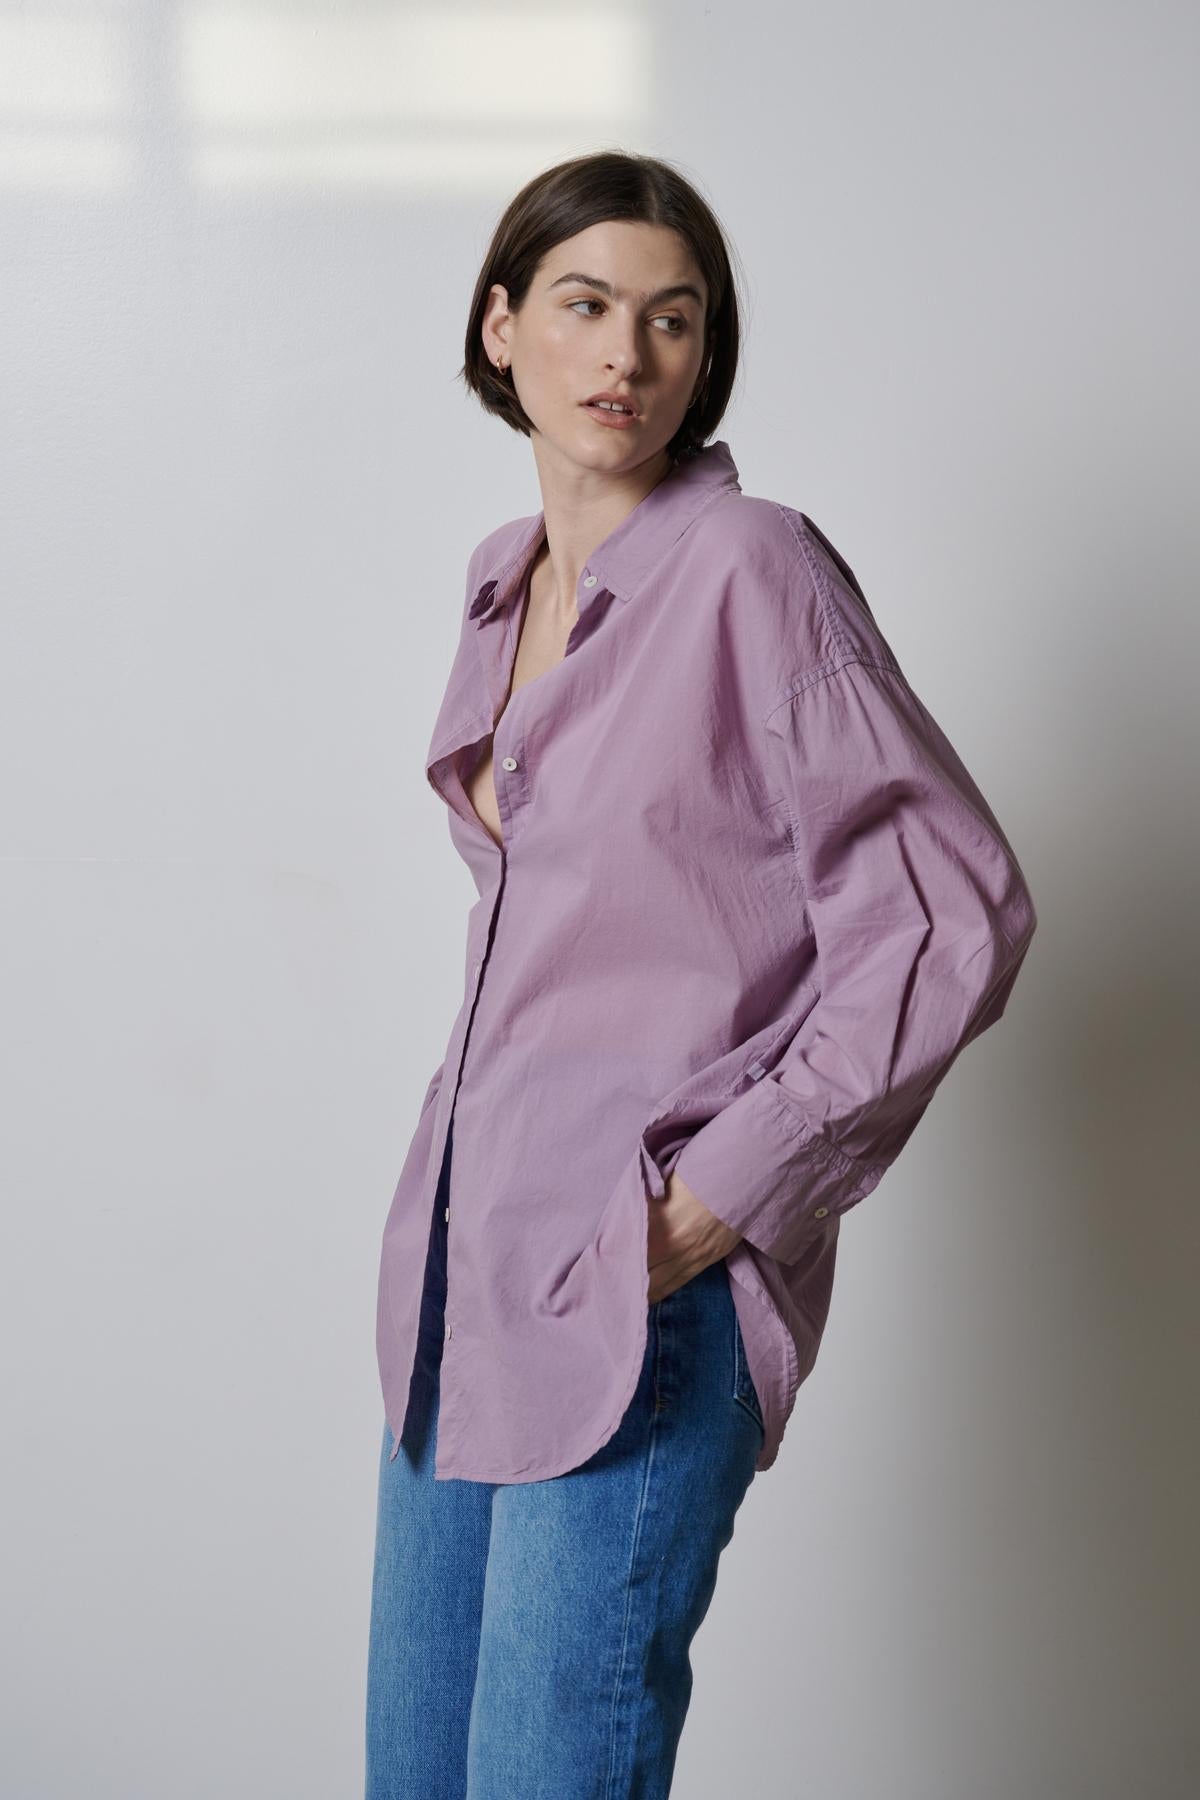   The model is wearing a Velvet by Jenny Graham REDONDO BUTTON-UP SHIRT and jeans. 